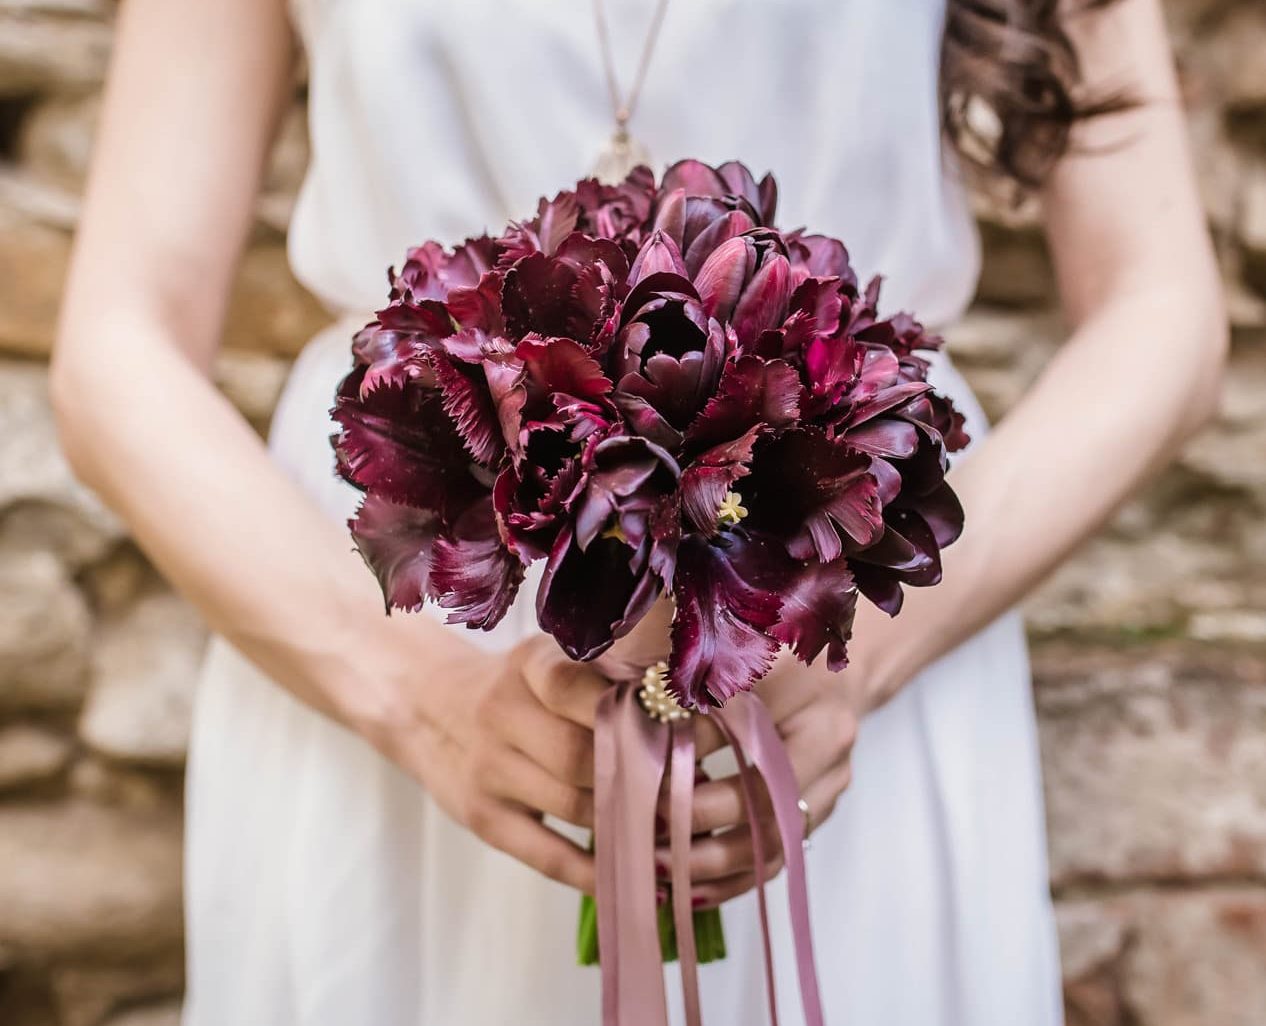 Bride holding a bouquet of maroon flowers